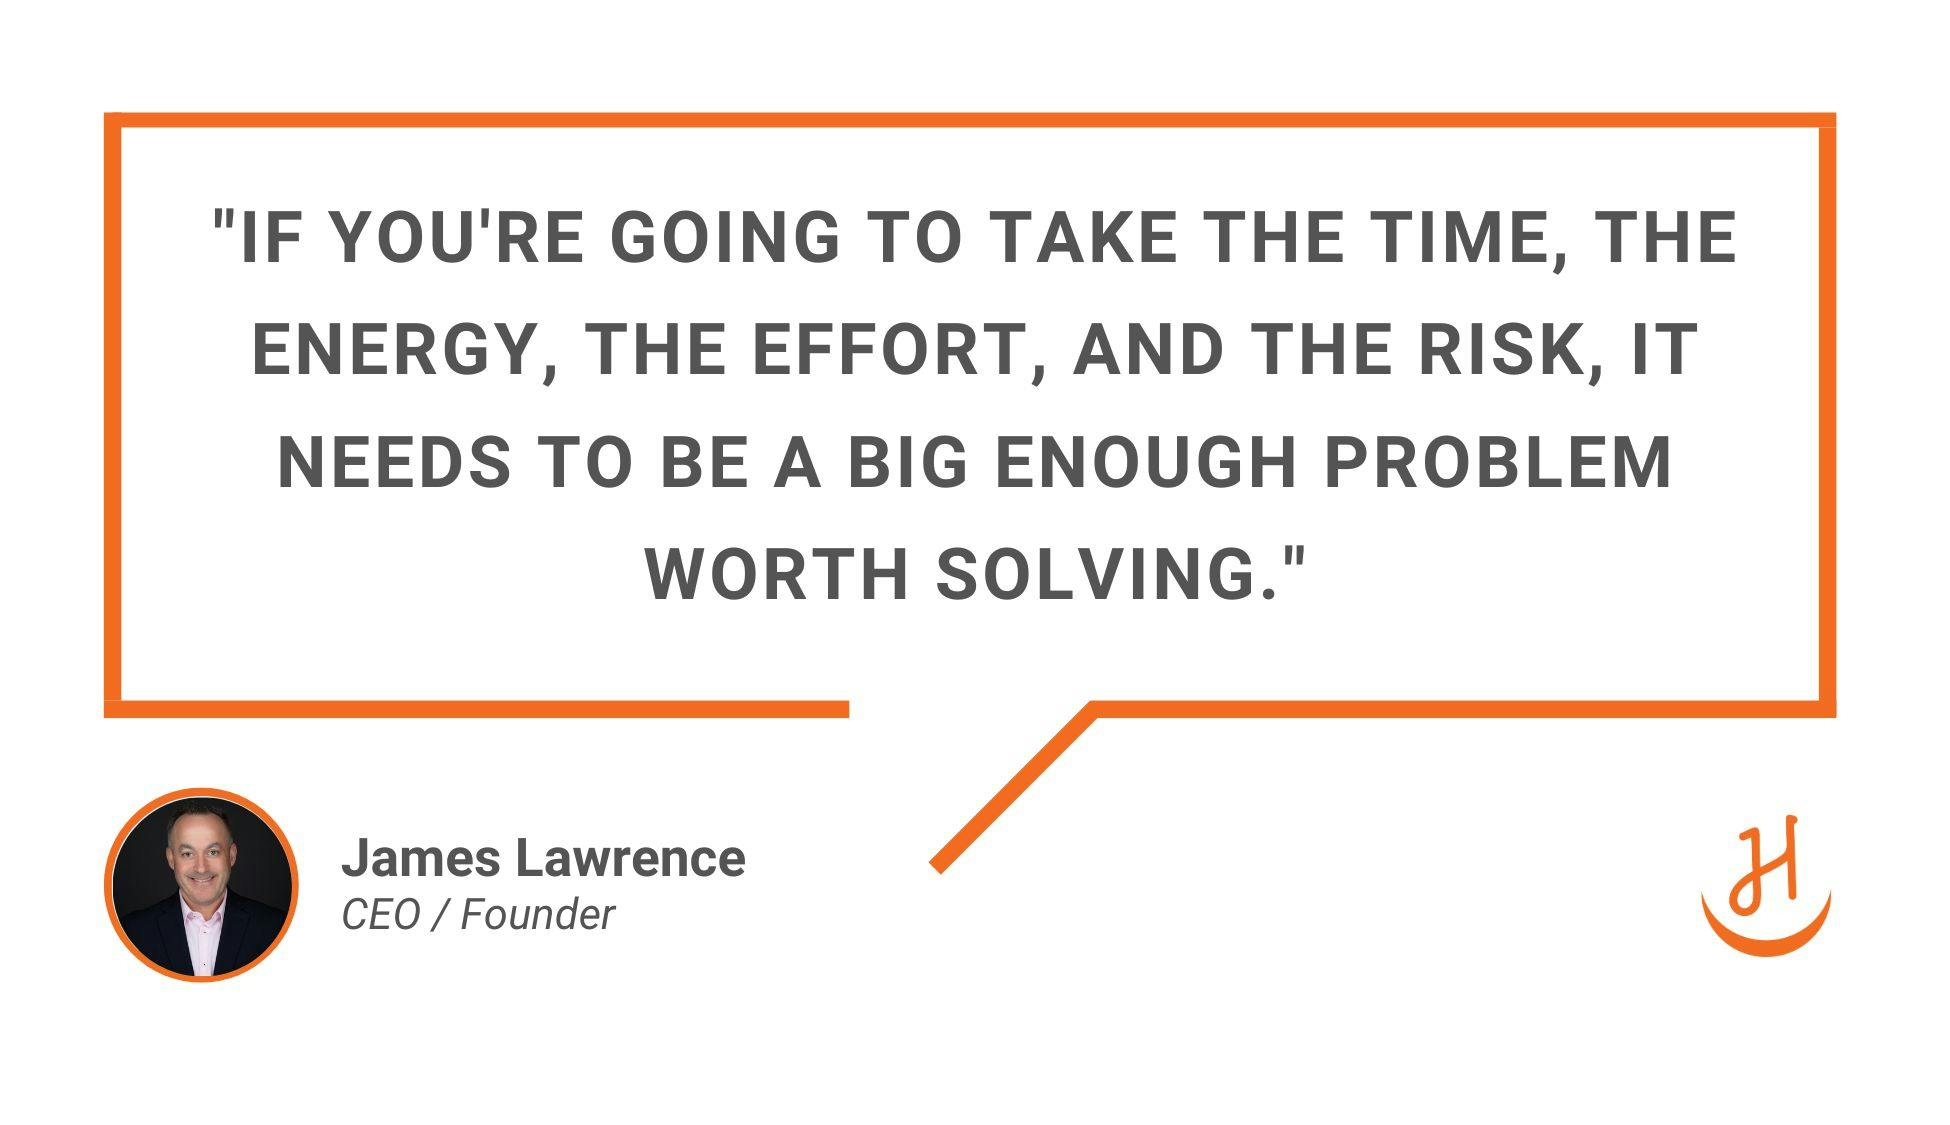 Quote by James Lawrence: "If you're going to take the time, the energy, the effort, and the risk, it needs to be a big enough problem worth solving."